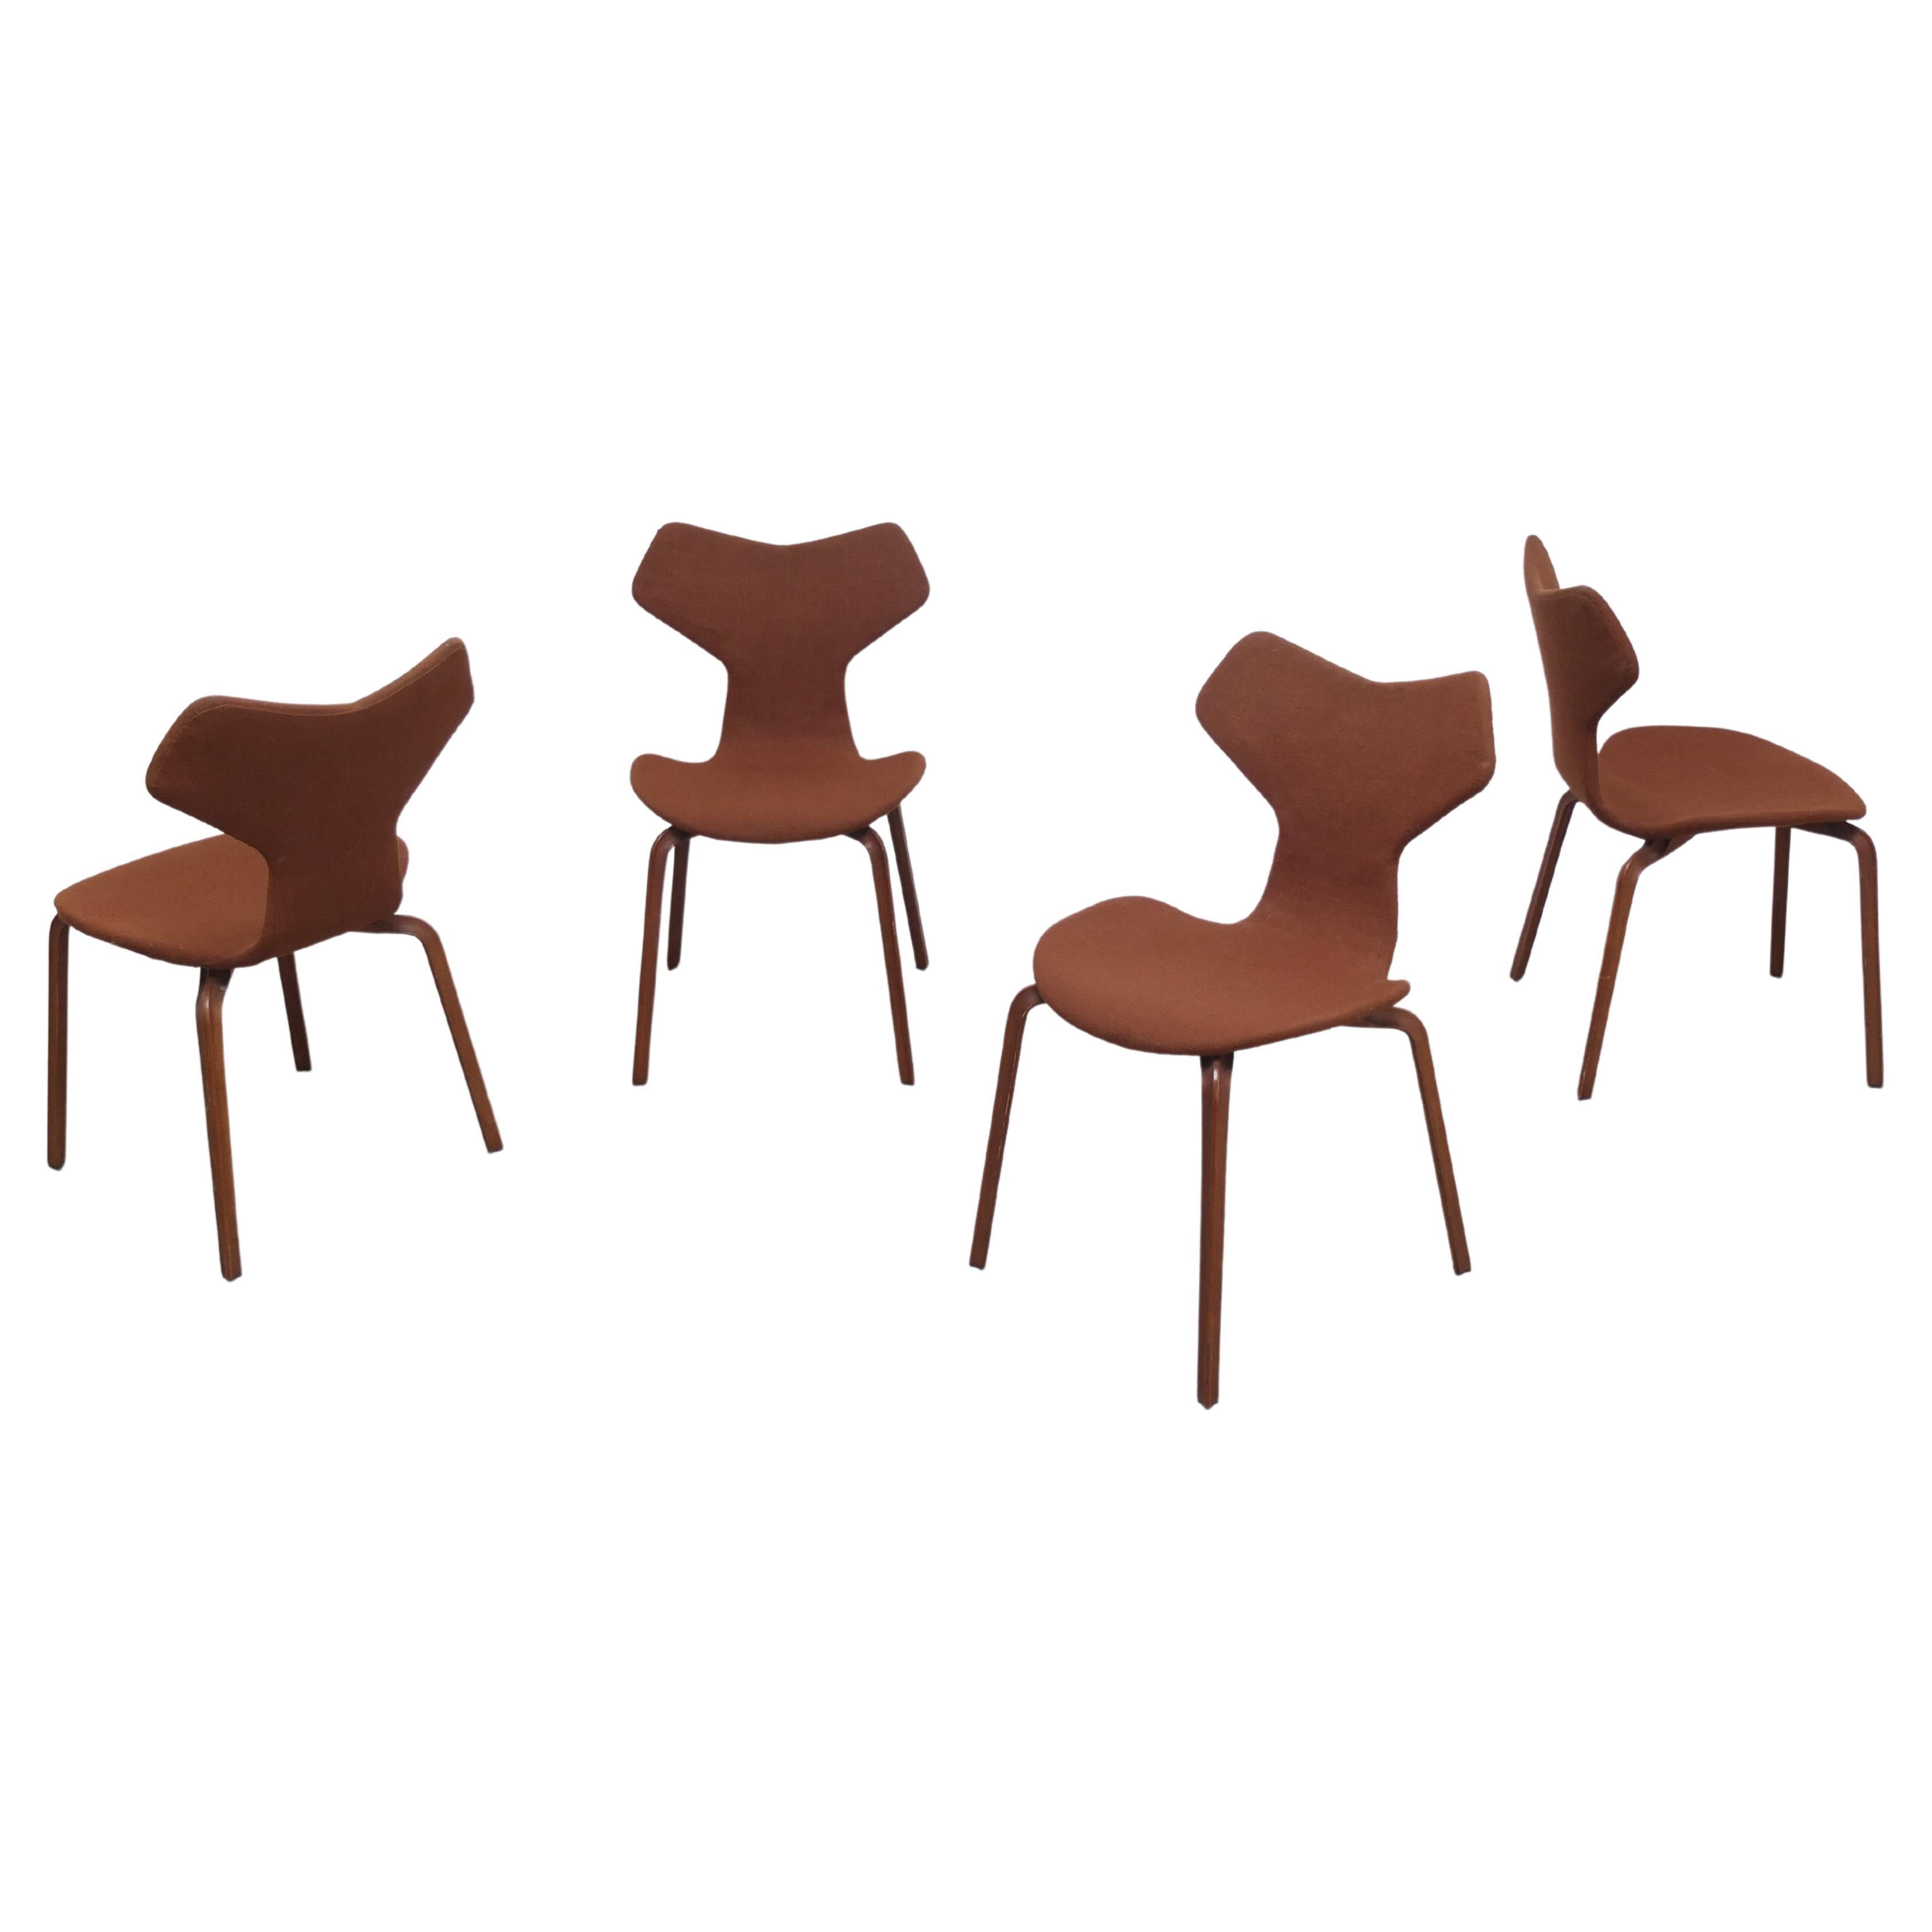 Set of 4 1st Edition 'Grand Prix' Chairs by Arne Jacobsen for Fritz Hansen, 1957 For Sale